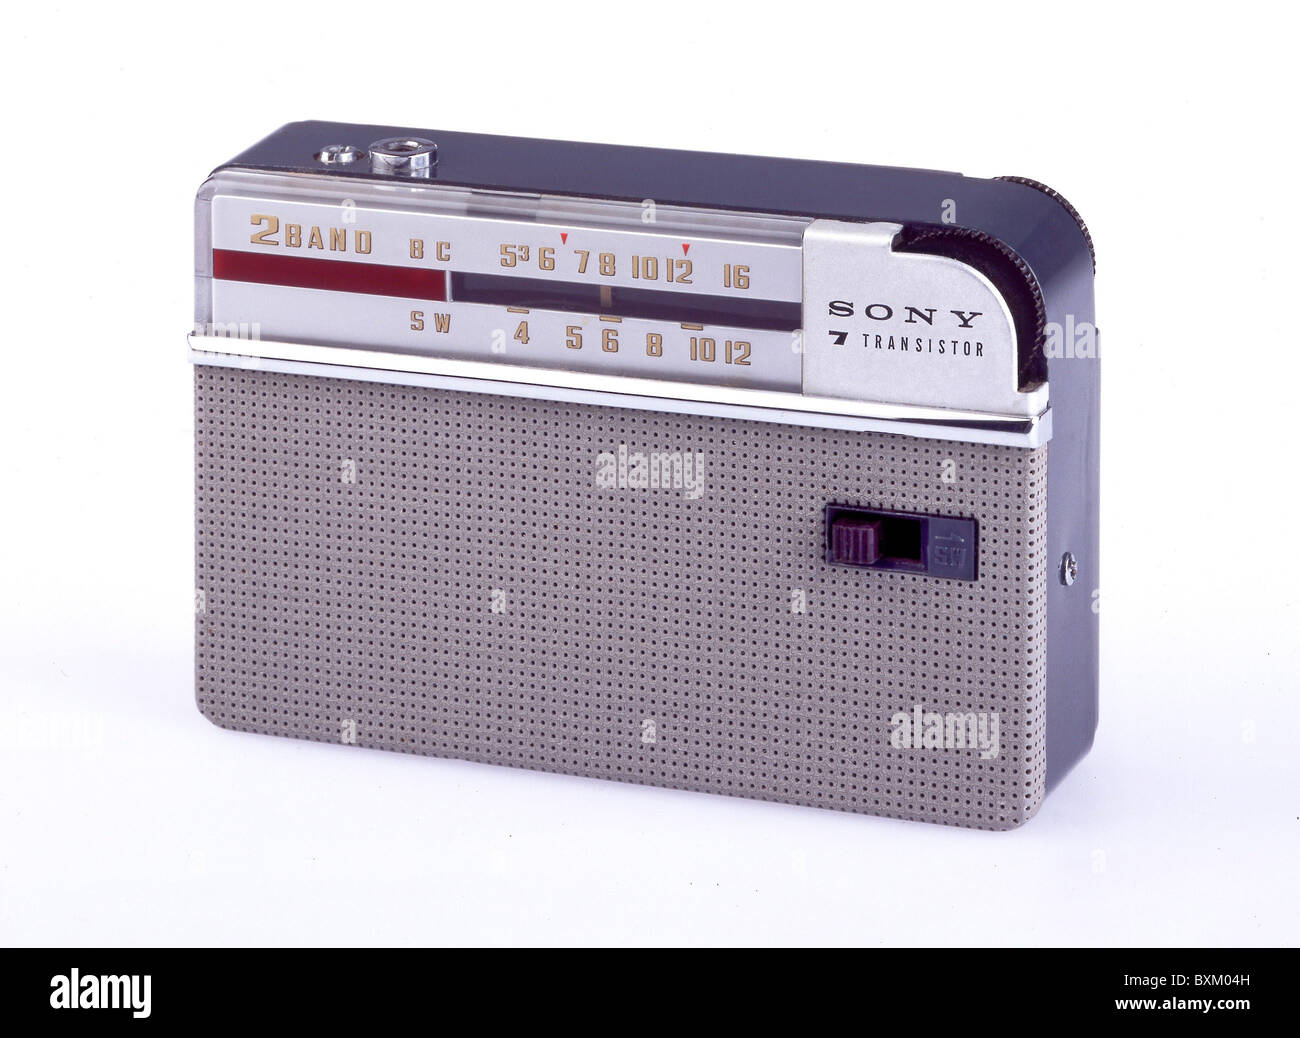 broadcast, radio sets, transistor radio, Sony TR 714, Japan, 1959, communications, technic, technics, historic, historical, 1950s, 50s, 20th century, pocket, portable, design, Japanese, Made in Japan, clipping, cut out, Los collection, cut-out, cut-outs, Additional-Rights-Clearences-Not Available Stock Photo